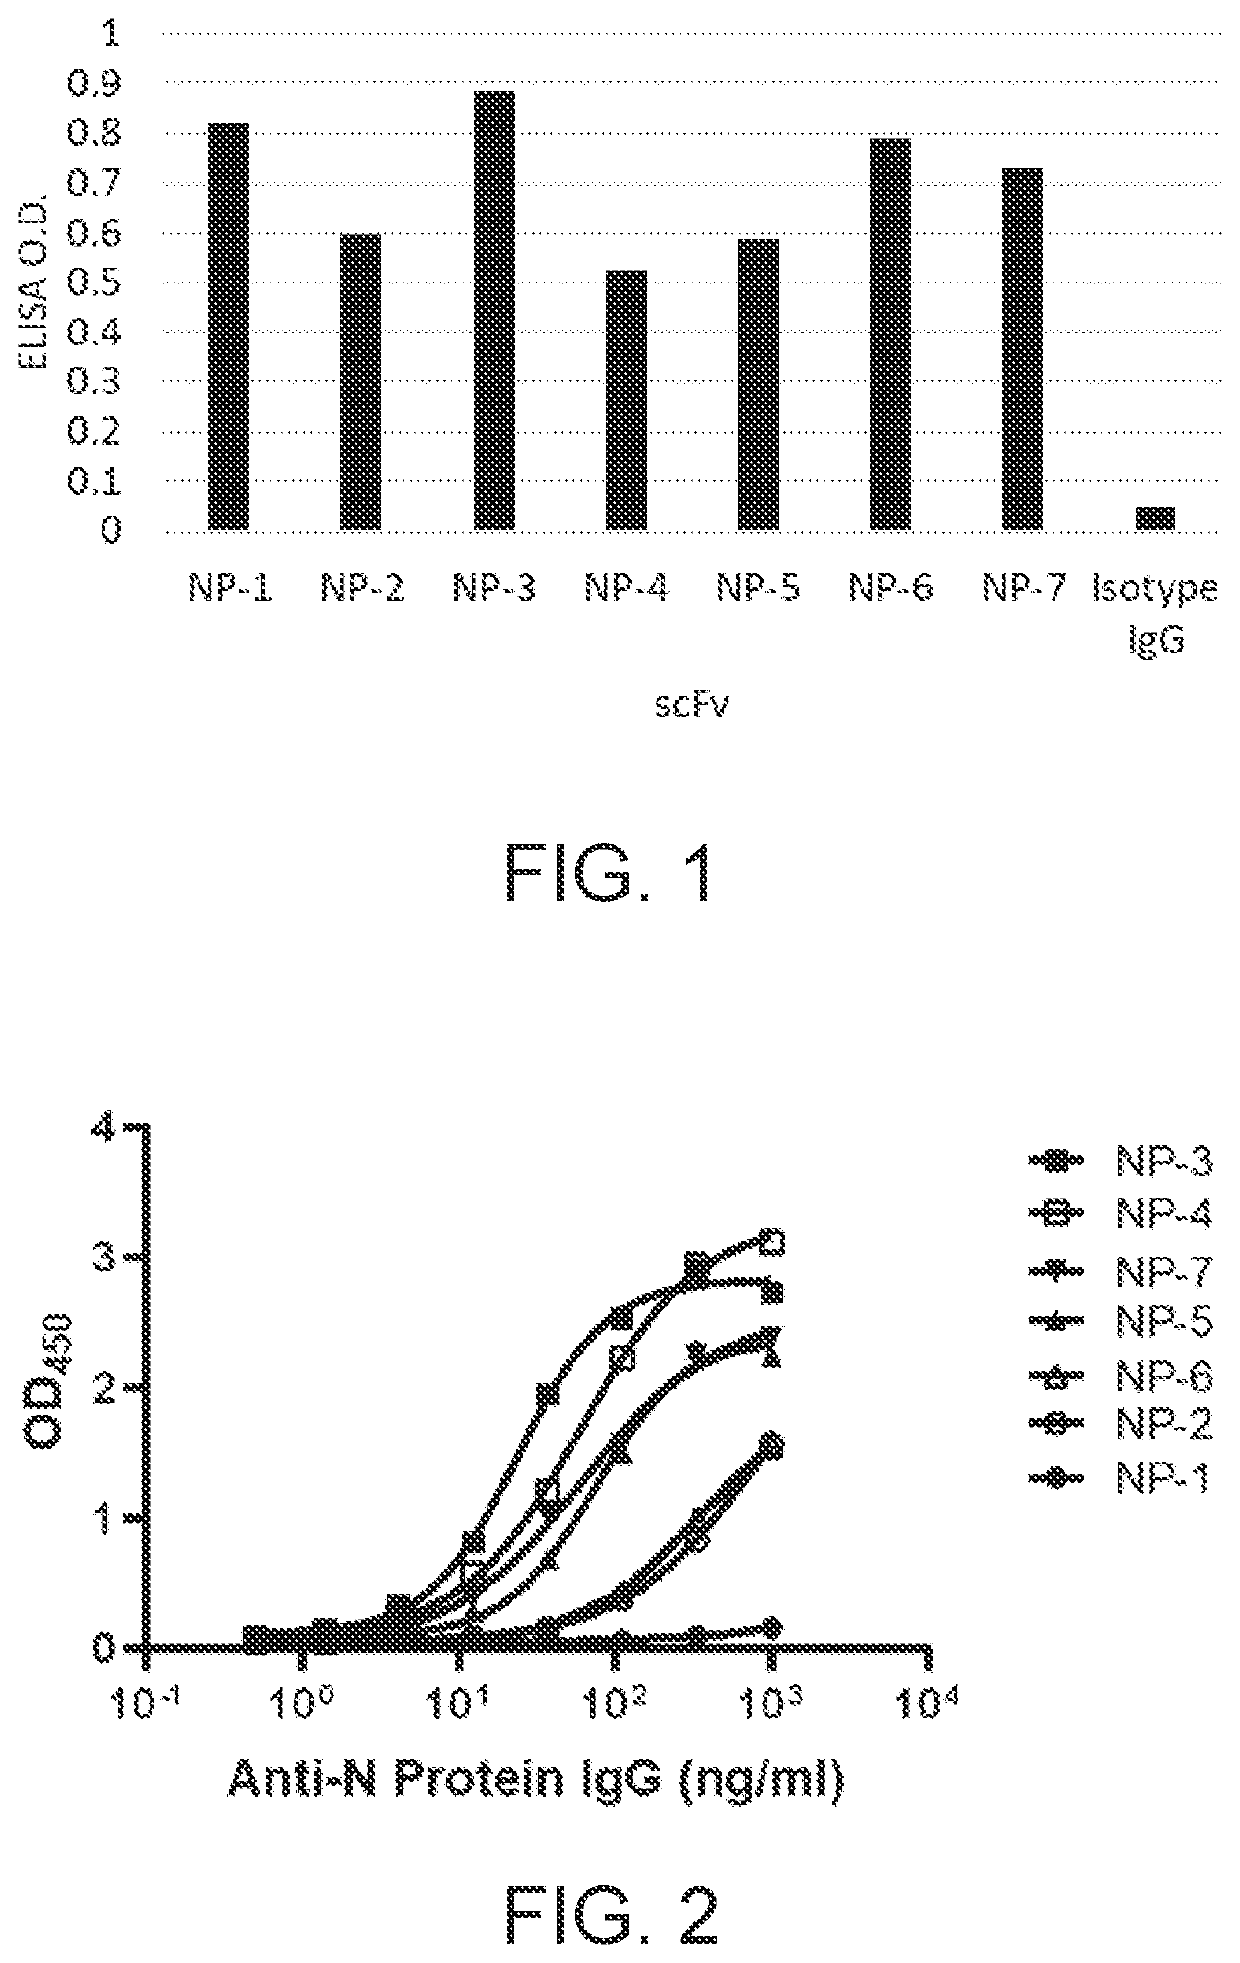 Recombinant antibodies, kits comprising the same, and uses thereof